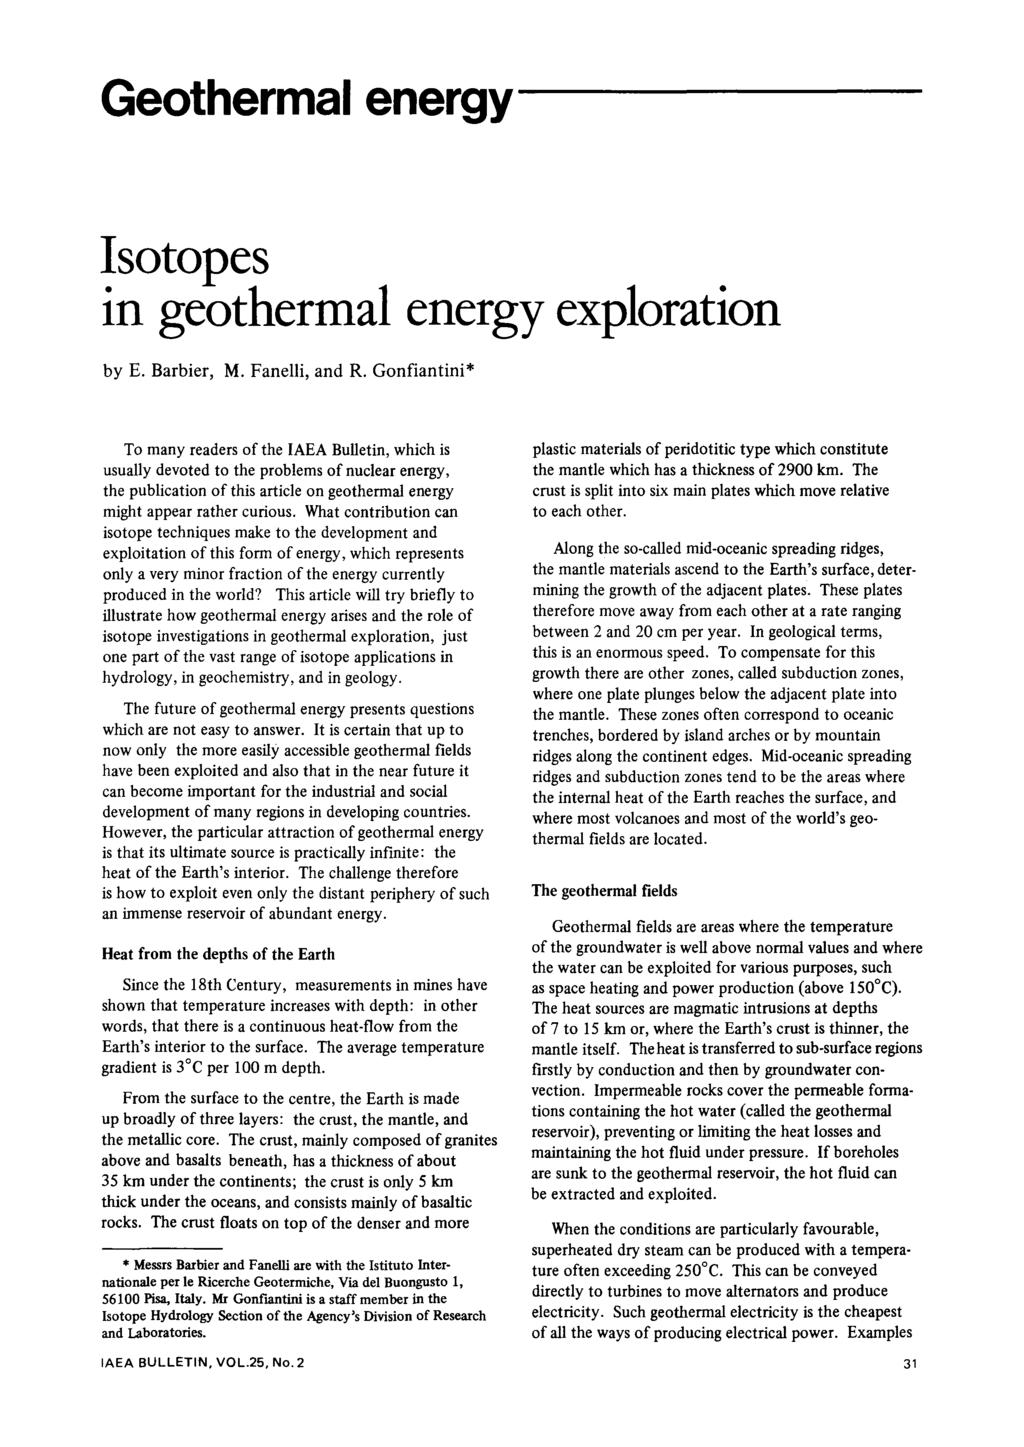 Isotopes in geothermal energy exploration by E. Barbier, M. Fanelli, and R.